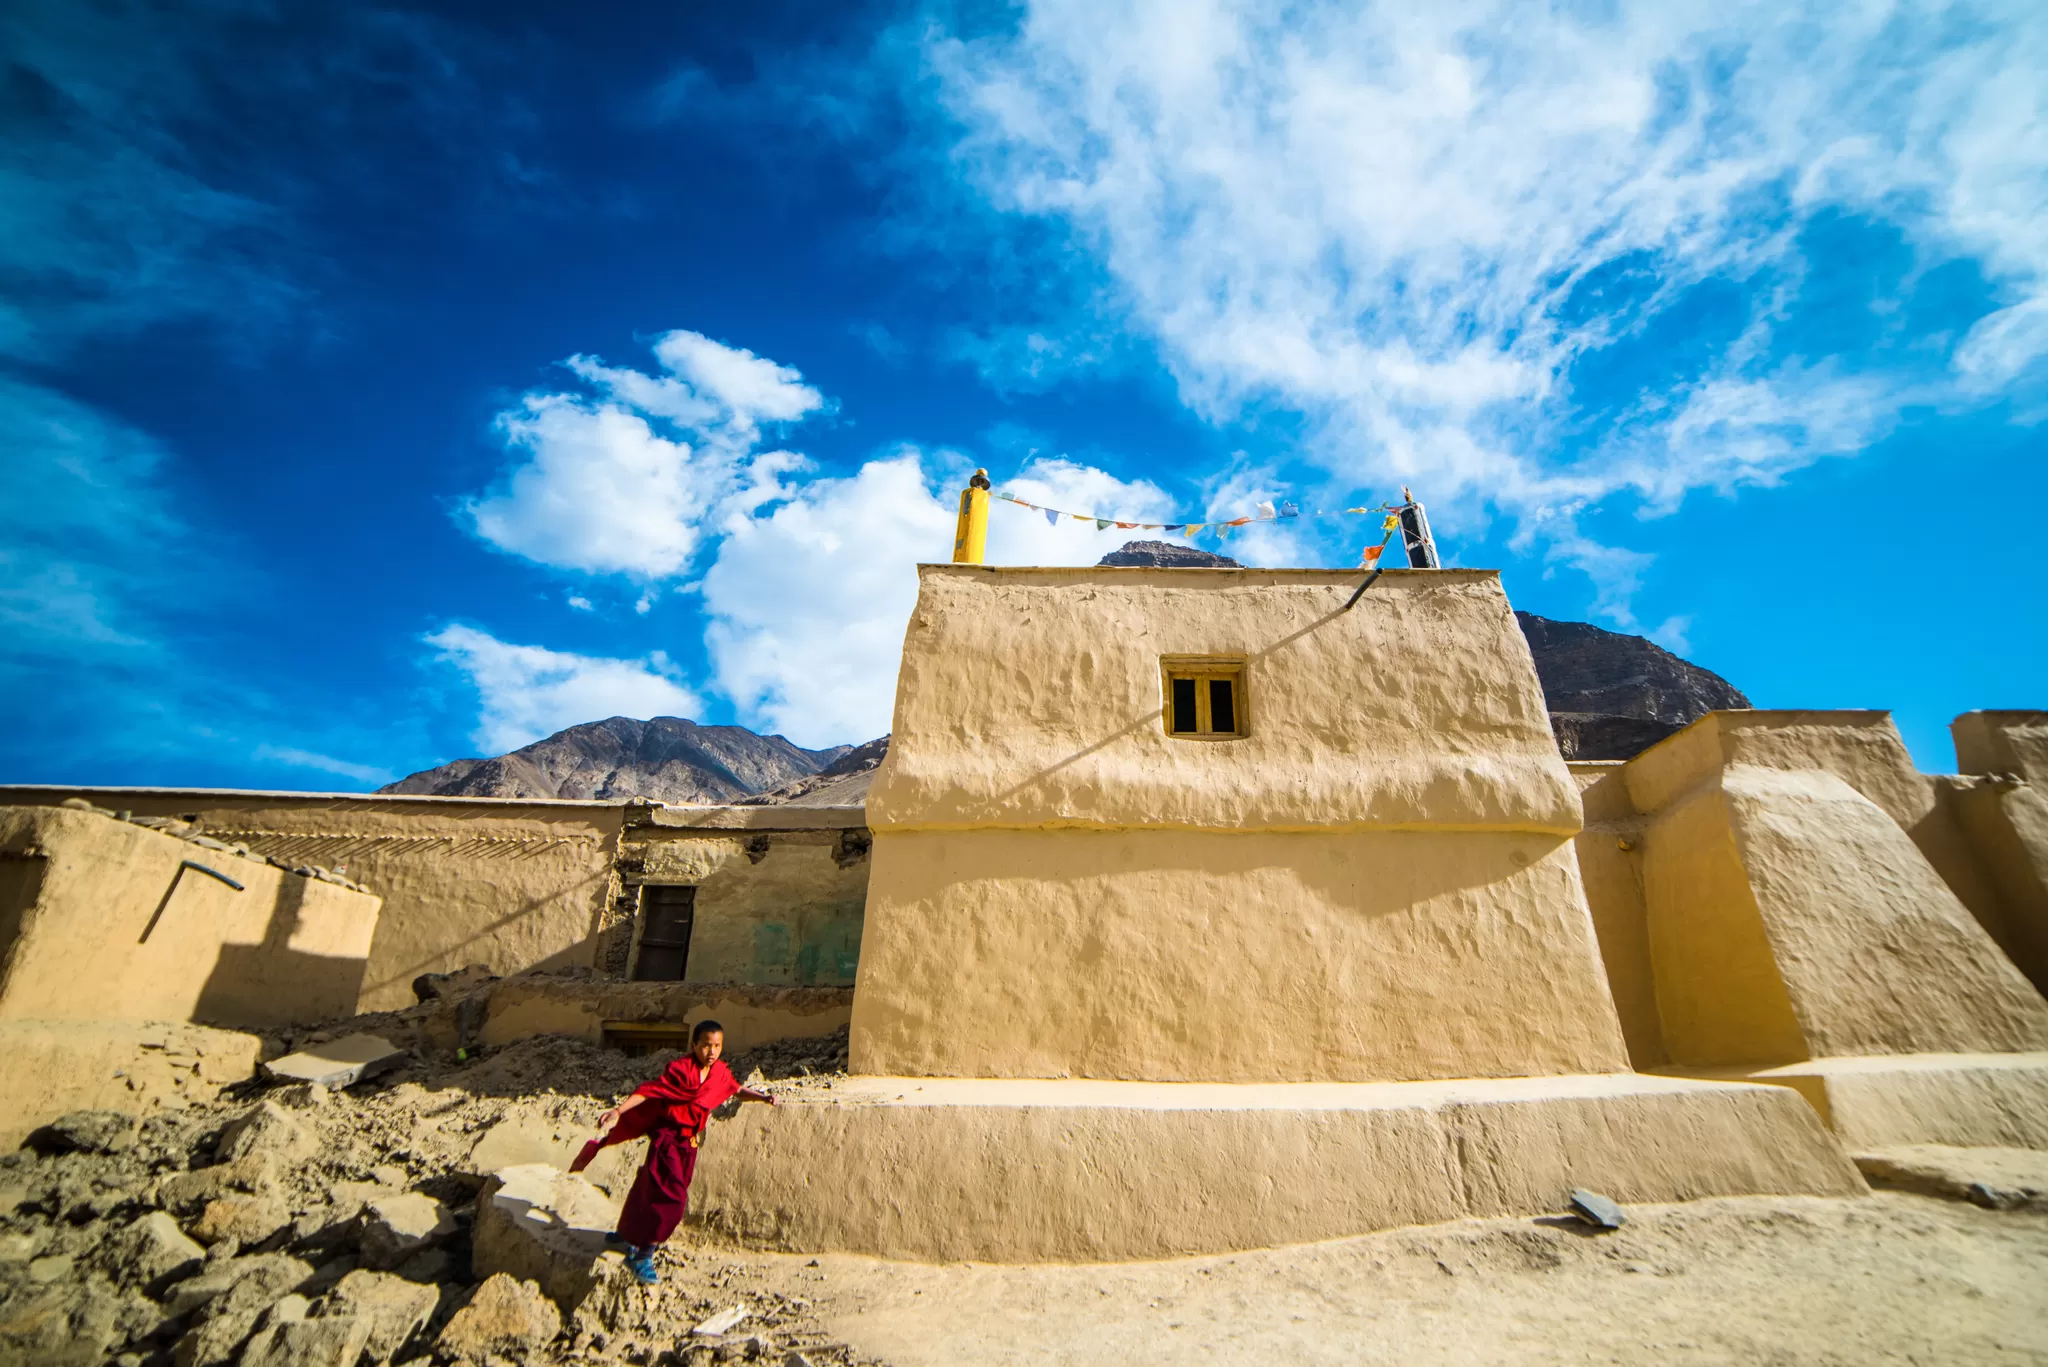 Tabo Monastery – An Ultimate Travel Guide for Beginners in Spiti Valley!